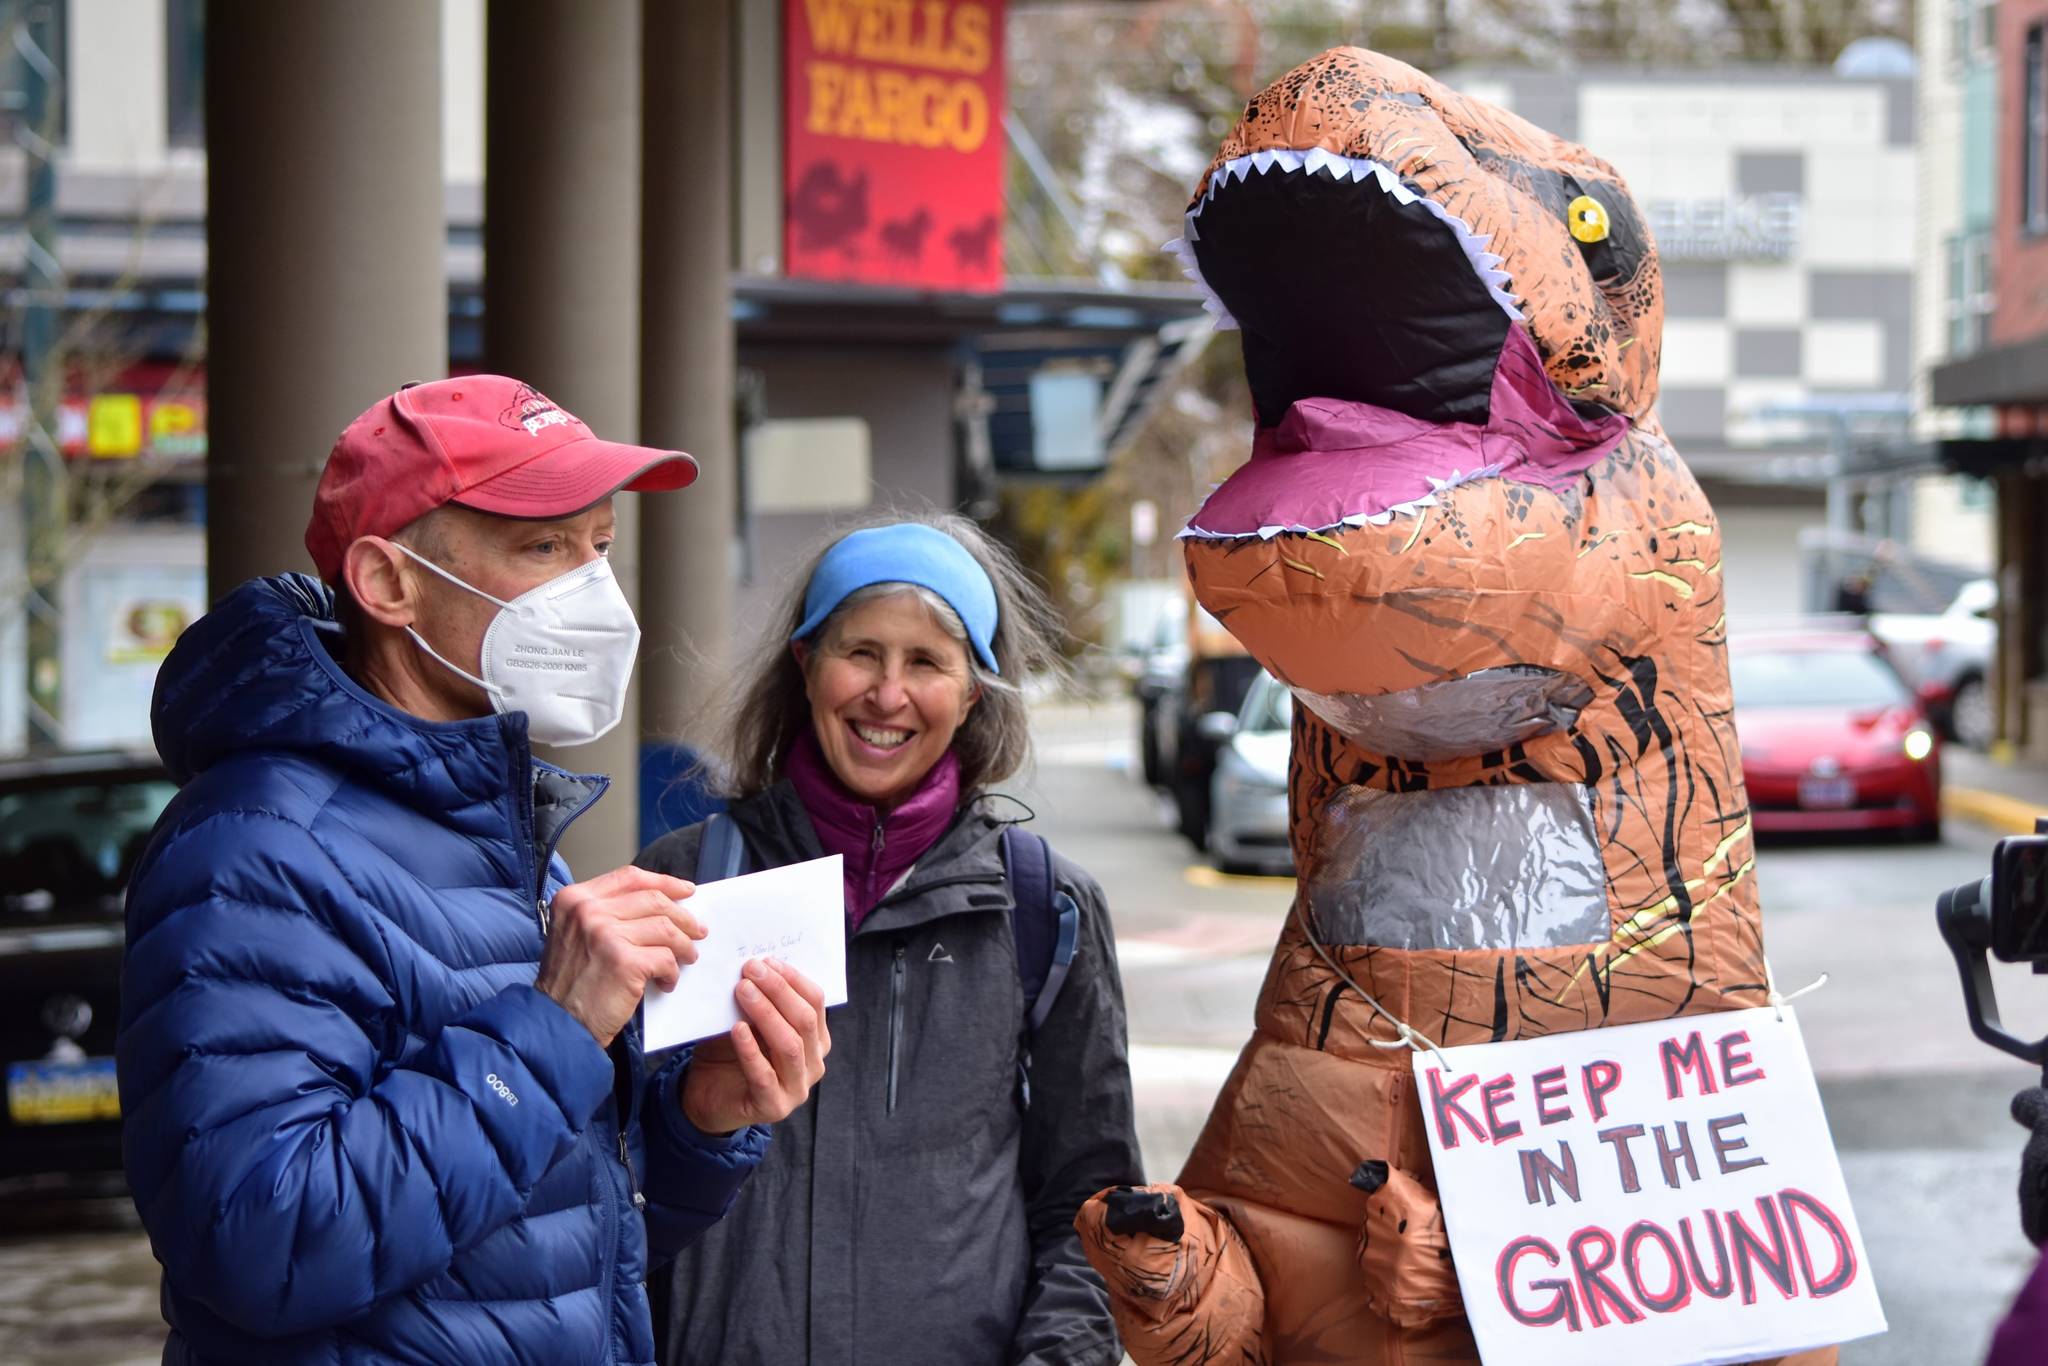 Doug Woodby, co-chair of environmental group 350Juneau, holds up a letter addressed to the CEO of Wells Fargo alongside Irene Alexakos and Dick Farnell, wearing the costume. The group delivered the letter urging divestment from the fossil fuel industry to the bank's branch in downtown Juneau on Friday, April 2, 2021. (Peter Segall / Juneau Empire)